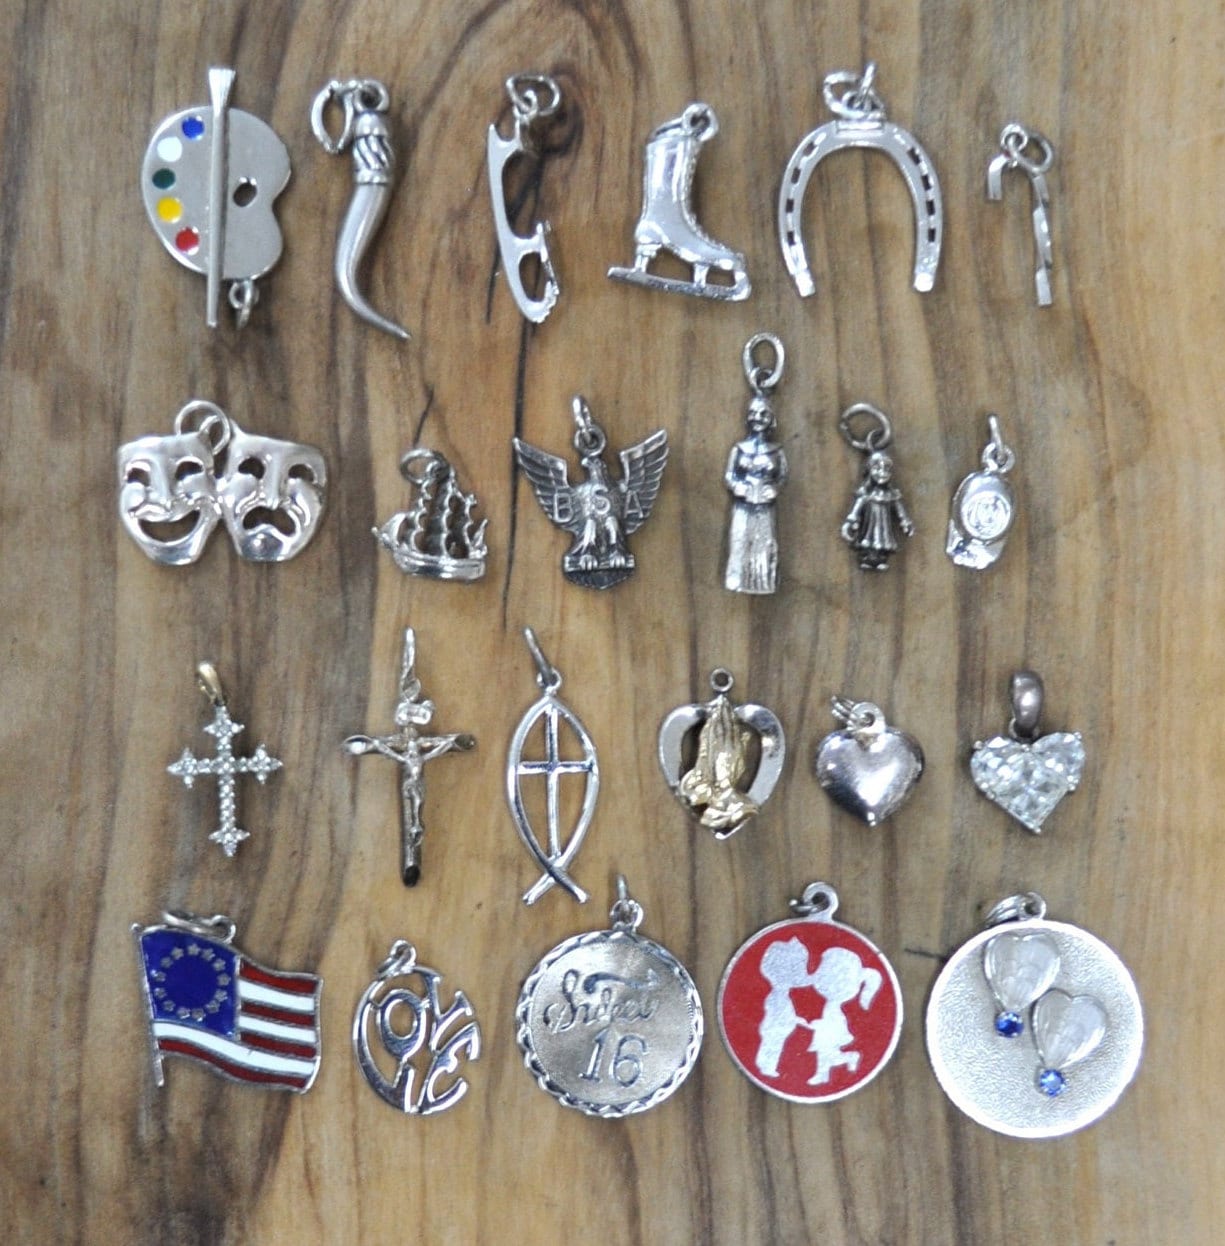 Even More Vintage Sterling Silver Charms! Choose by Charm! Bracelet Charms, Working Charms, Animal Charms, Spiritual Charms, + many more!